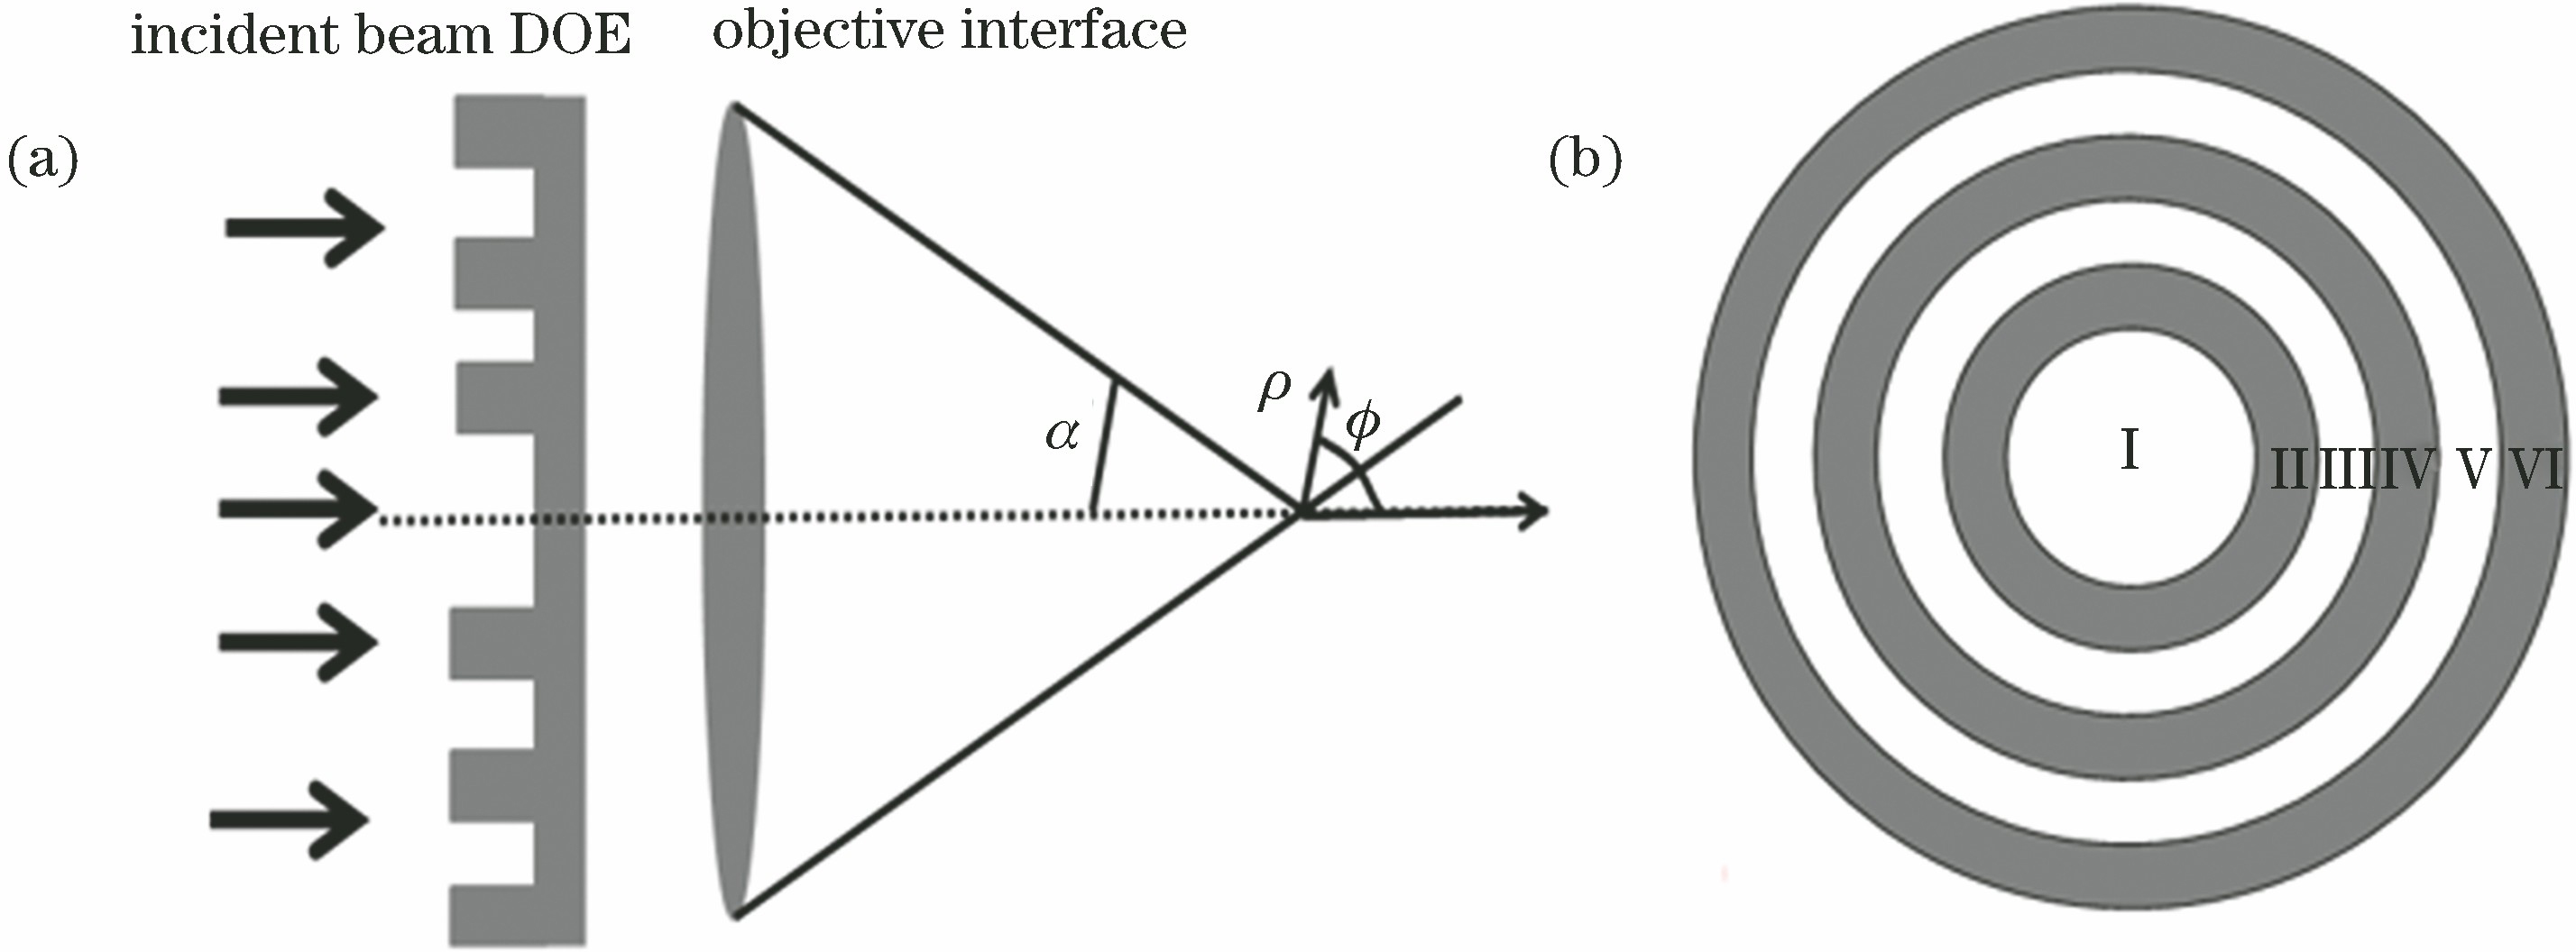 Focusing optical system. (a) Schematic of tight focusing optical system; (b) structure of DOE